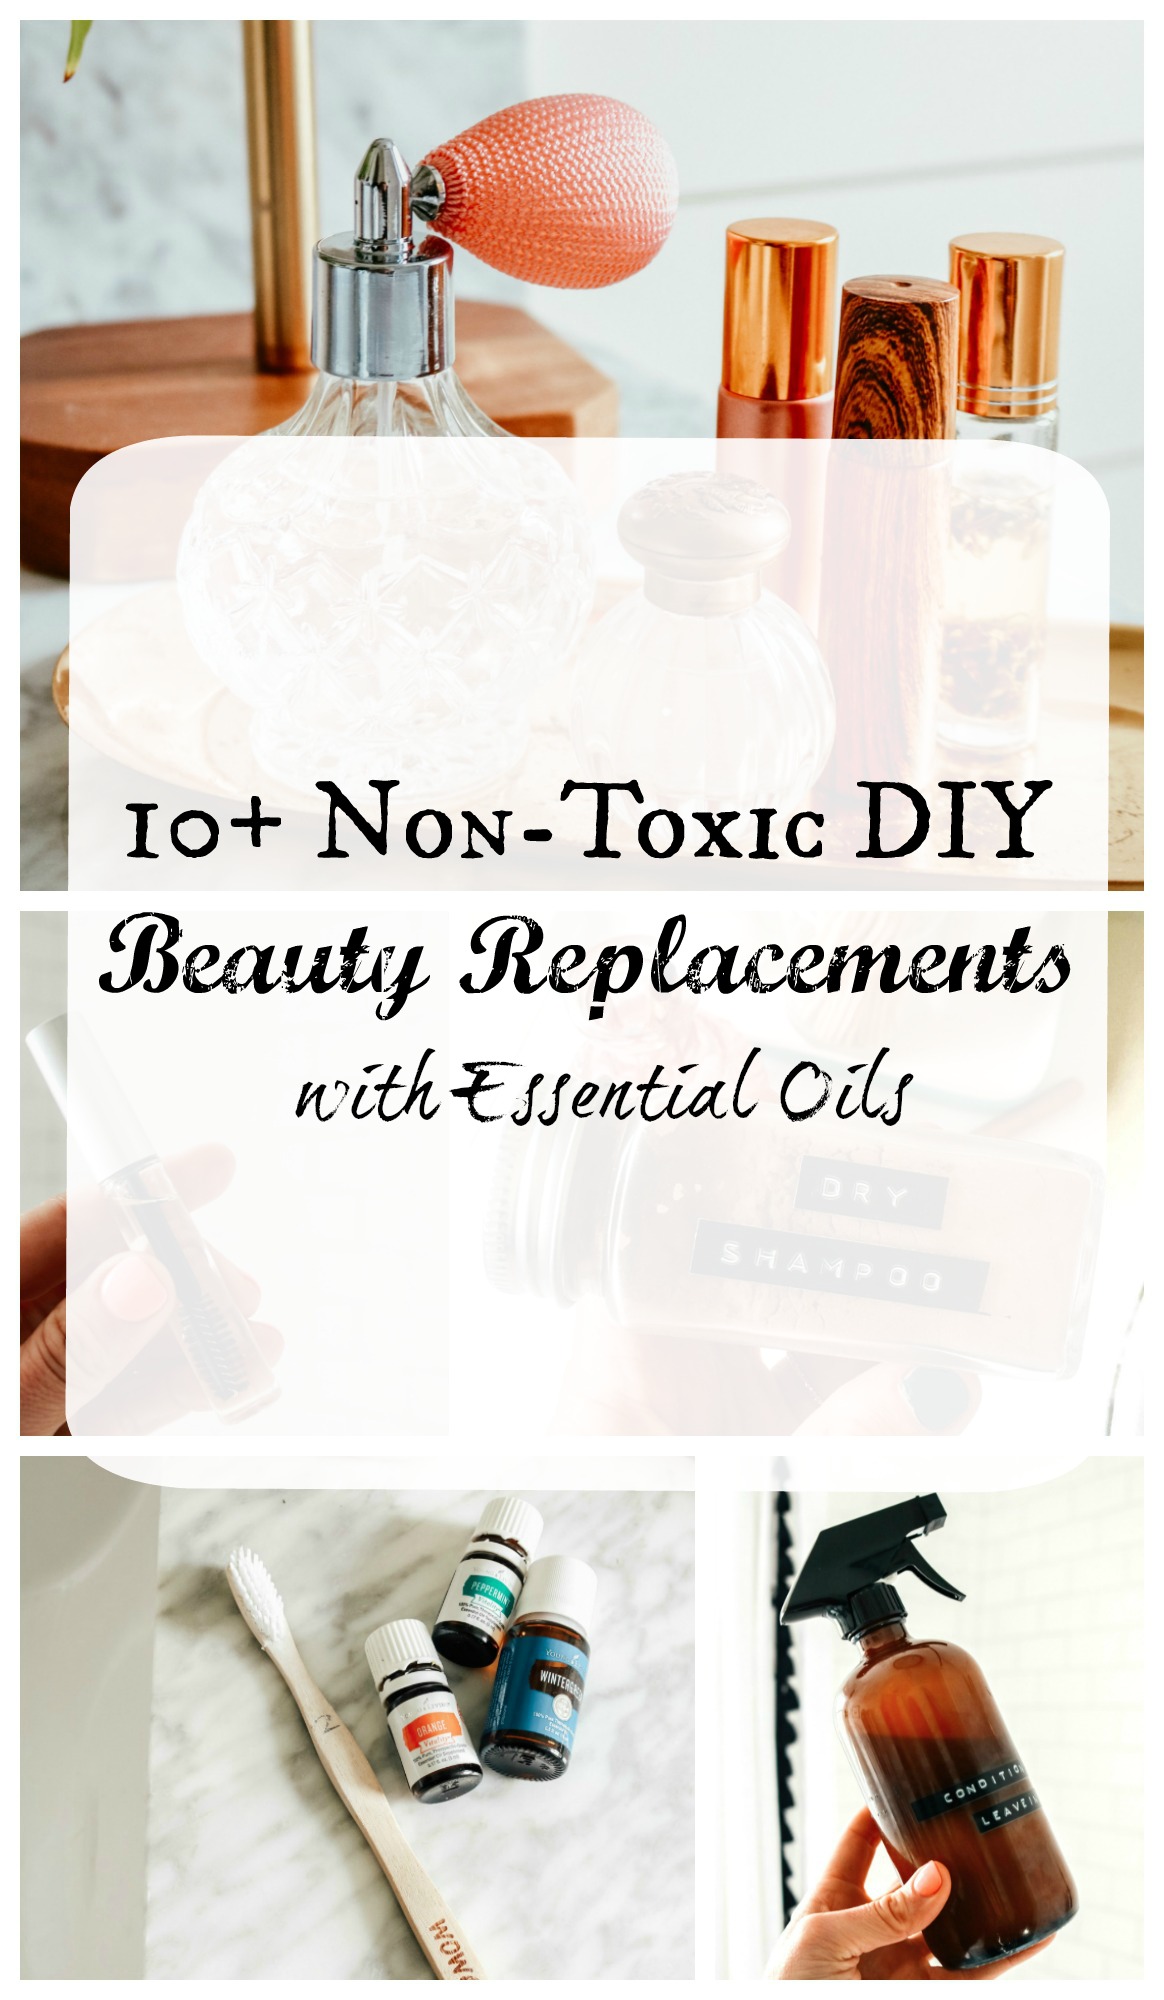 10+ Non-Toxic DIY Beauty Replacements with Essential Oils